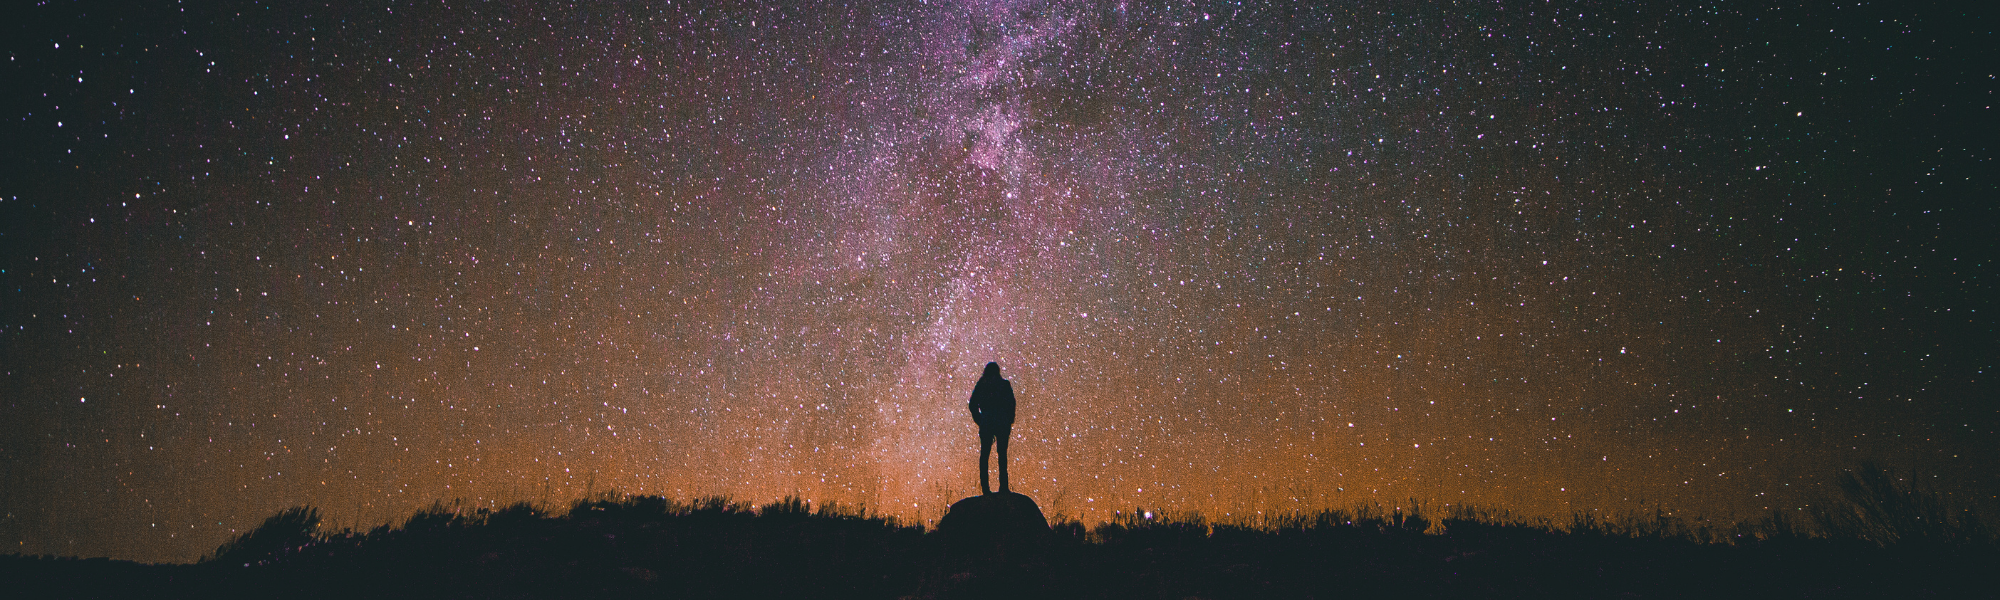 Image shows a person standing on a ridge looking out into the night sky which is filled with stars and the Milky Way.  Image courtesy of Canva